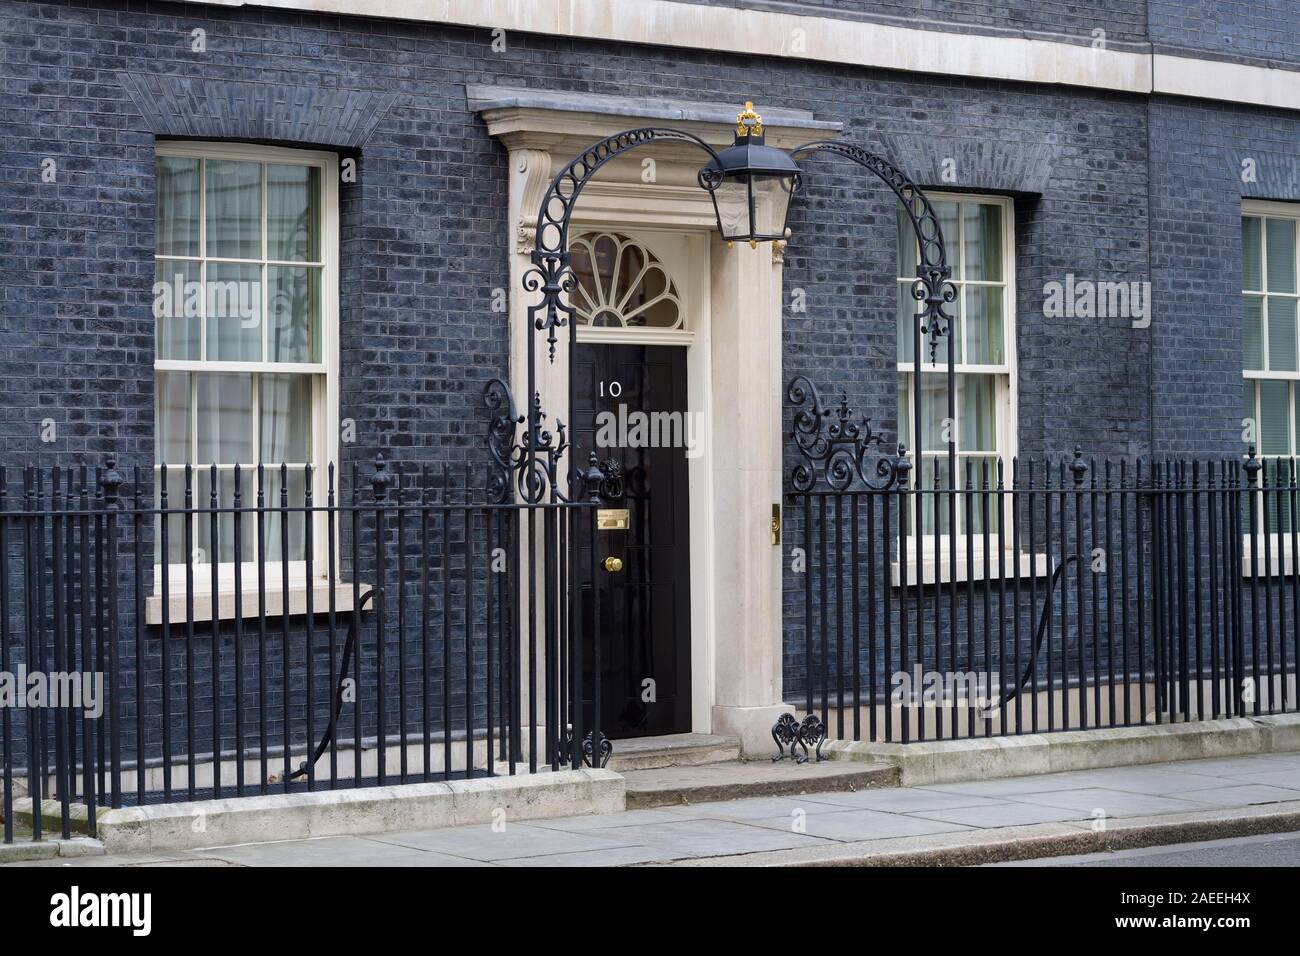 10 Downing Street The Official Residence And The Office Of The British Prime Minister London Uk 7 Feb 18 Stock Photo Alamy